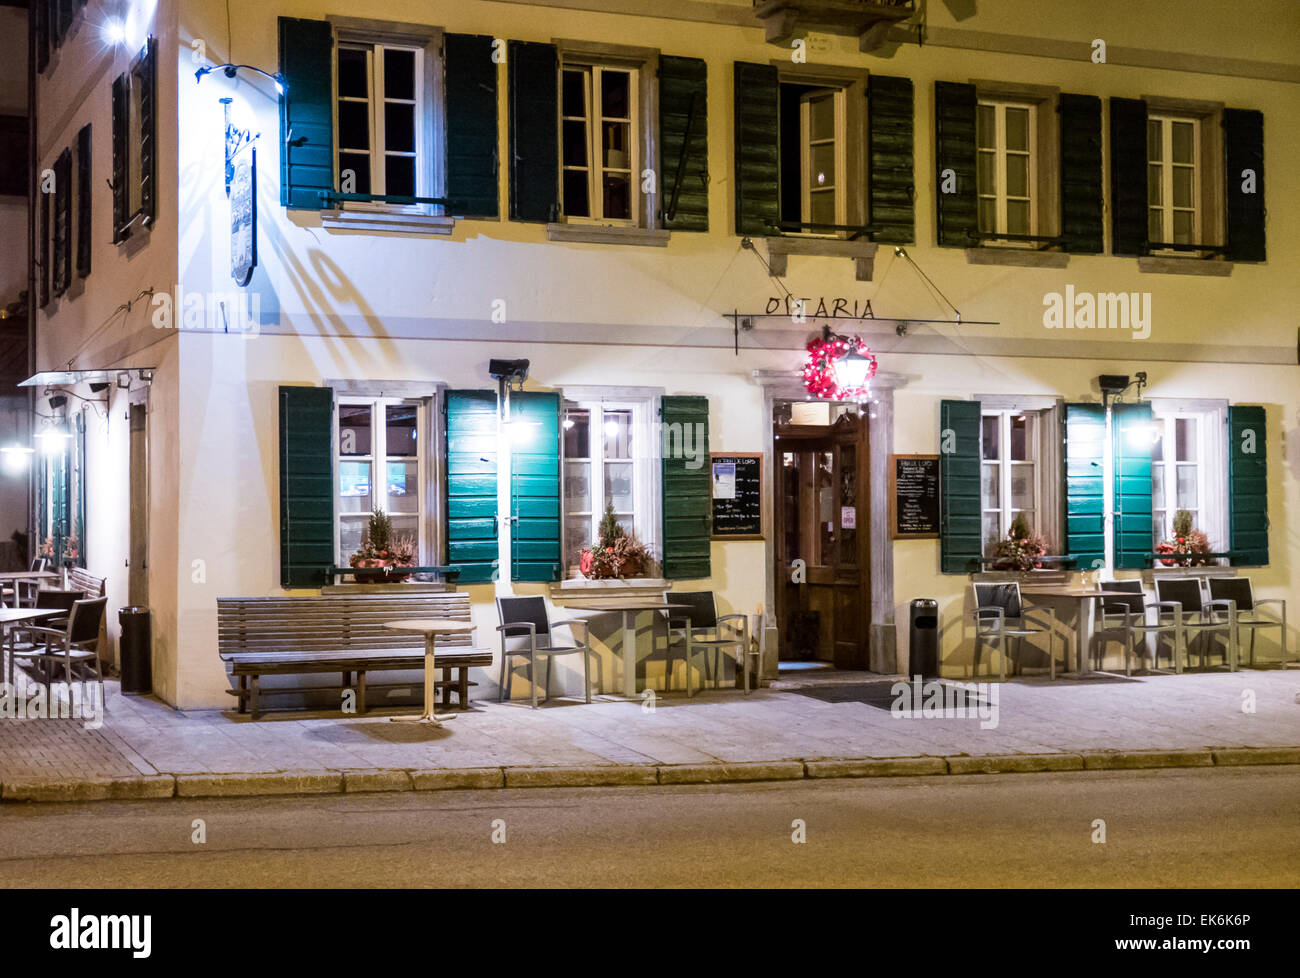 Exterior night view of restaurant in northern Italy Stock Photo